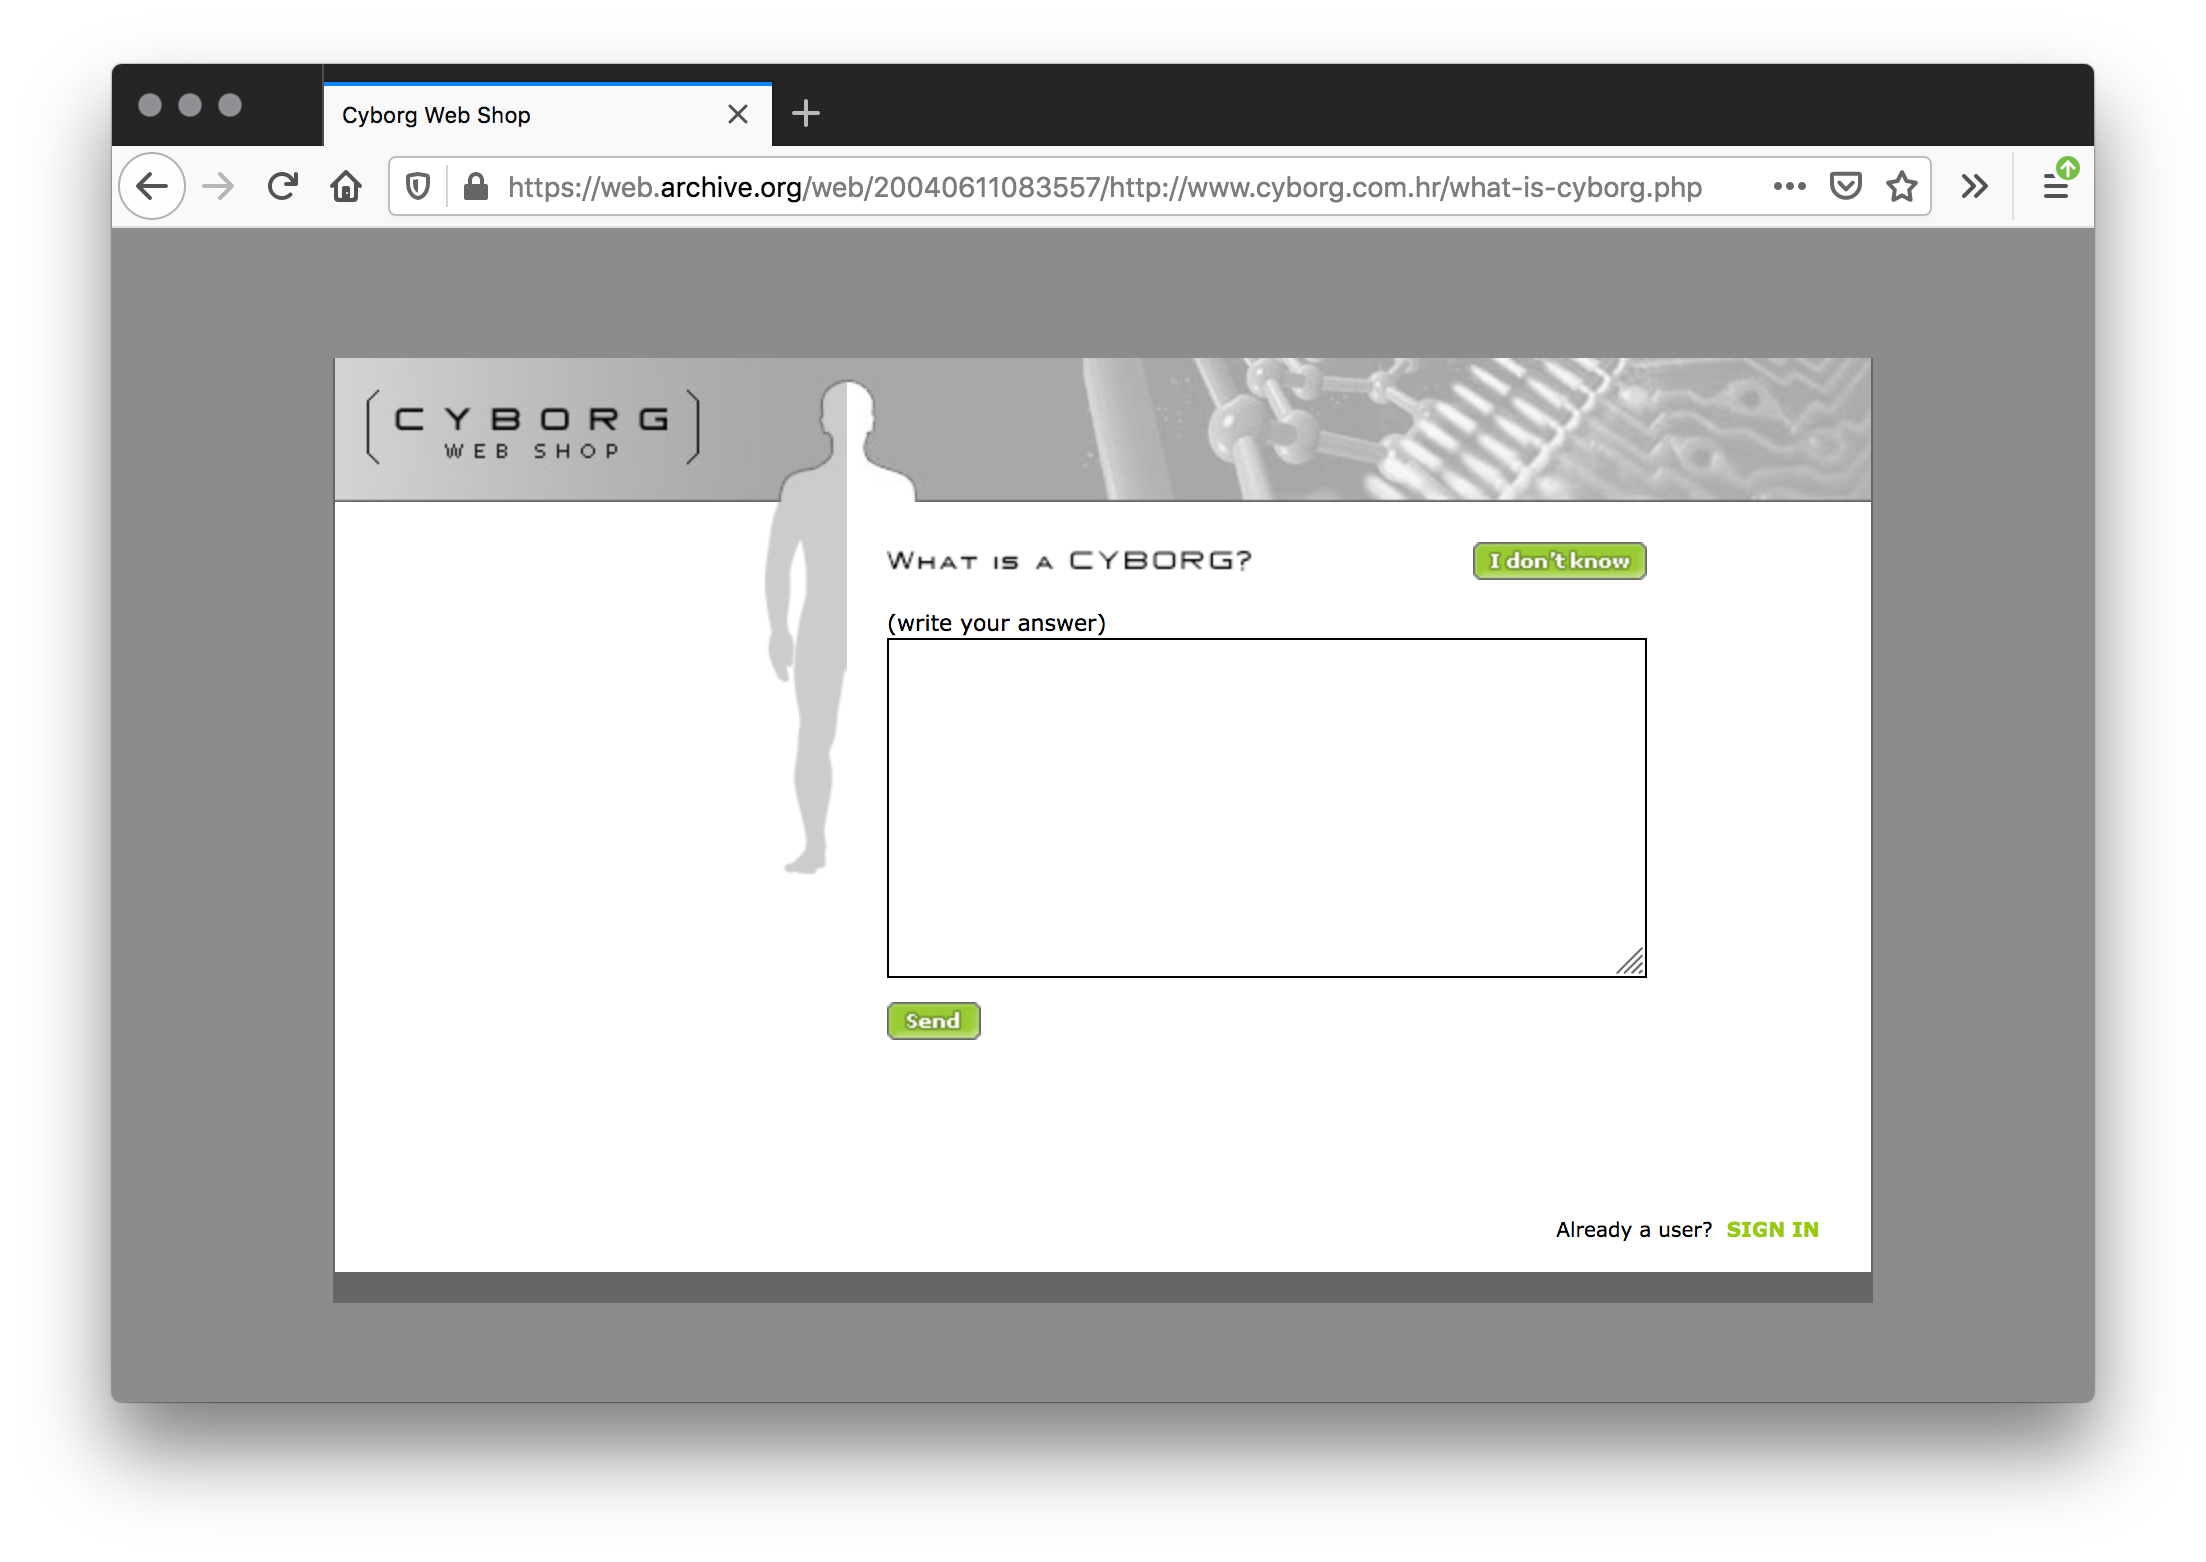 Screenshot of a website with a gray background. In the center is a banner that says Cyborg Web Shop with a silhouette of a man next to a text field that says “What is a cyborg?”